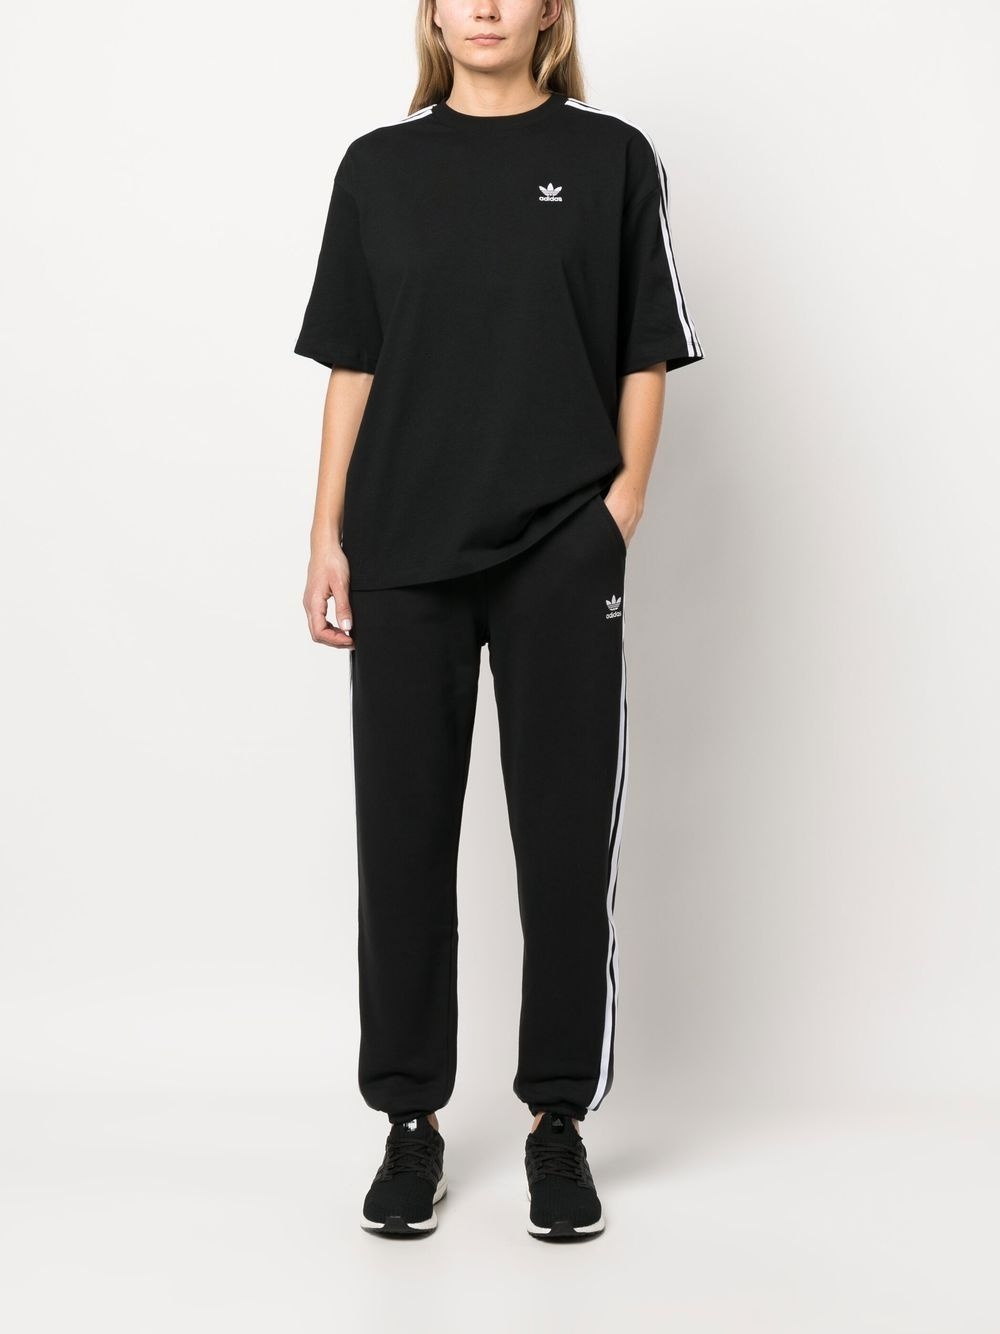 embroidered-logo detail track pants - 2